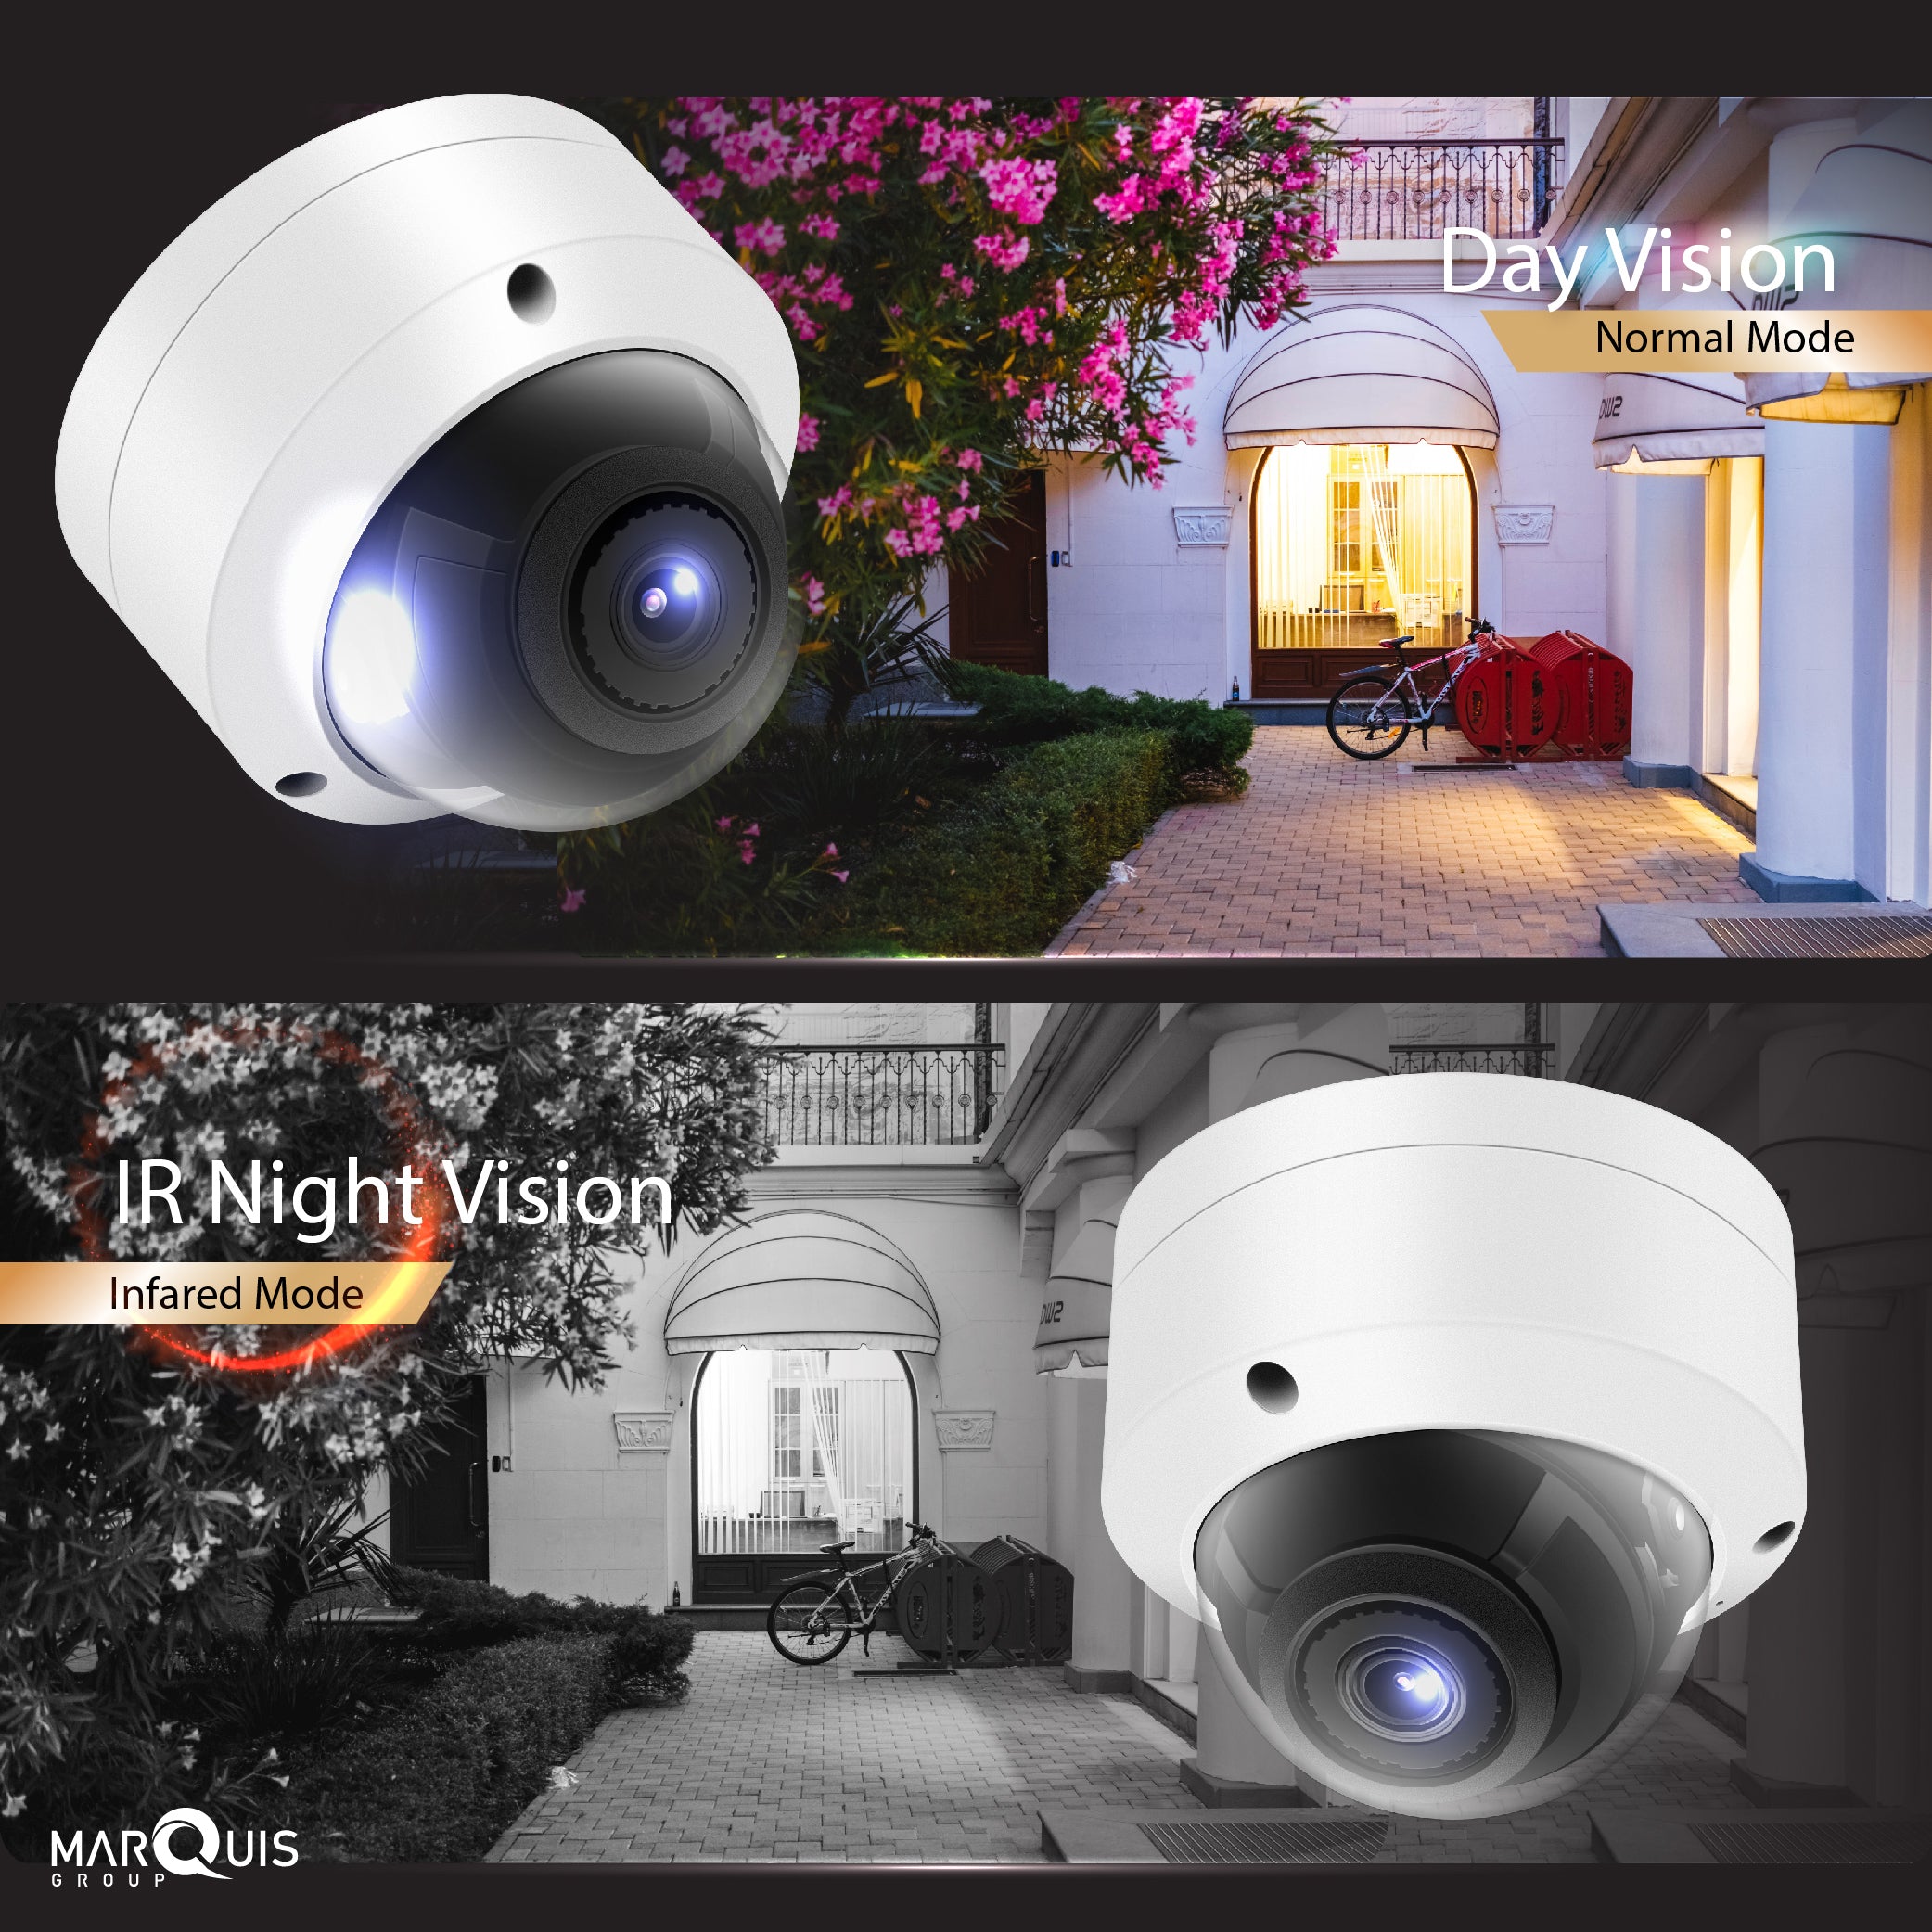 Hikvision/Uniview Compatible IP Dome Camera (4MP)- IPC-YD400